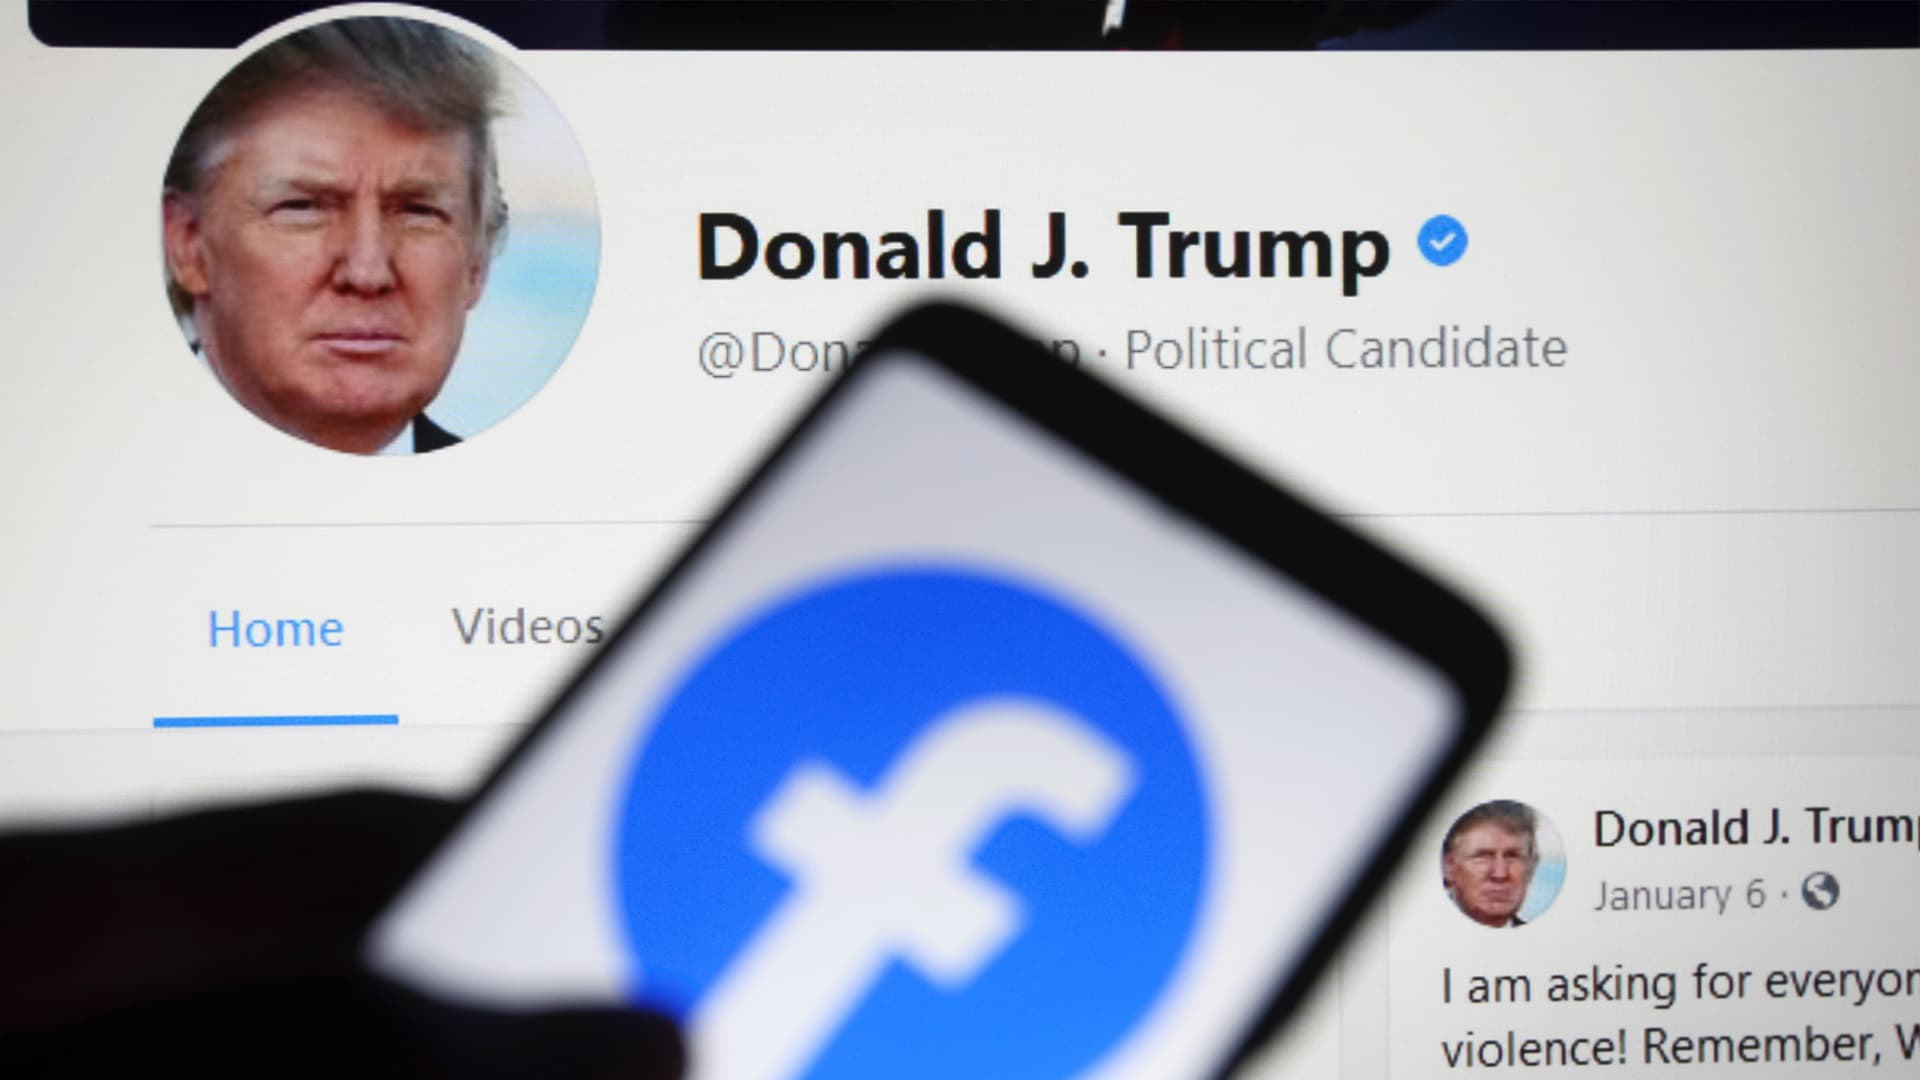 Facebook suspends Donald Trump's account for two years.